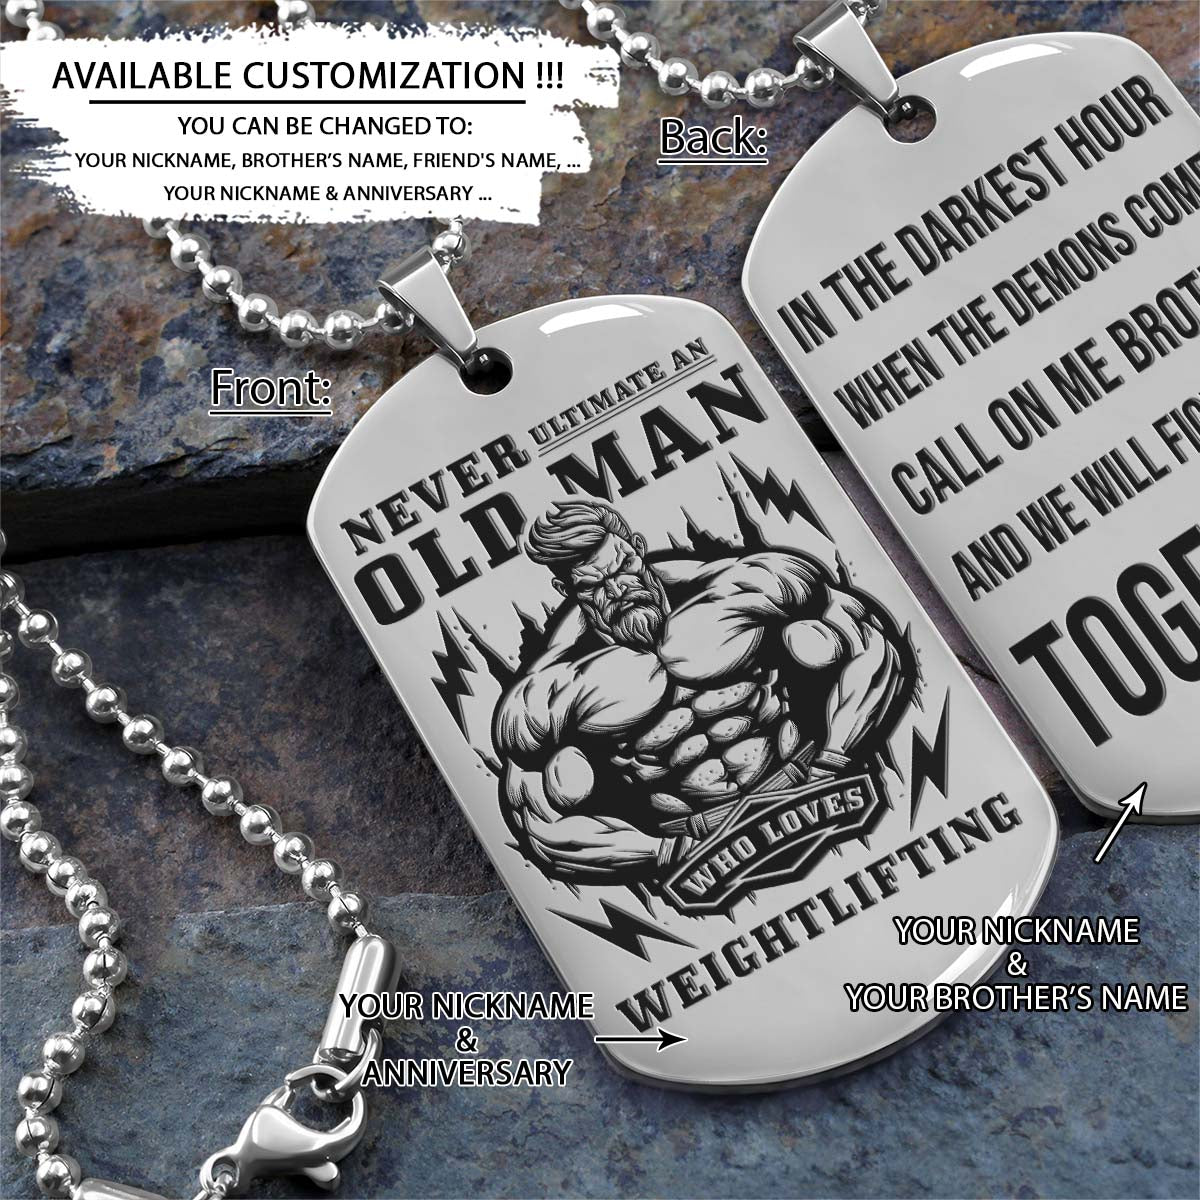 Never Ultimate An Old Man Who Loves Weightlifting - Call One Me Brother - Gym - Fitness Center - Workout - Gym Dog Tag - Gym Necklace - Engrave Dog Tag